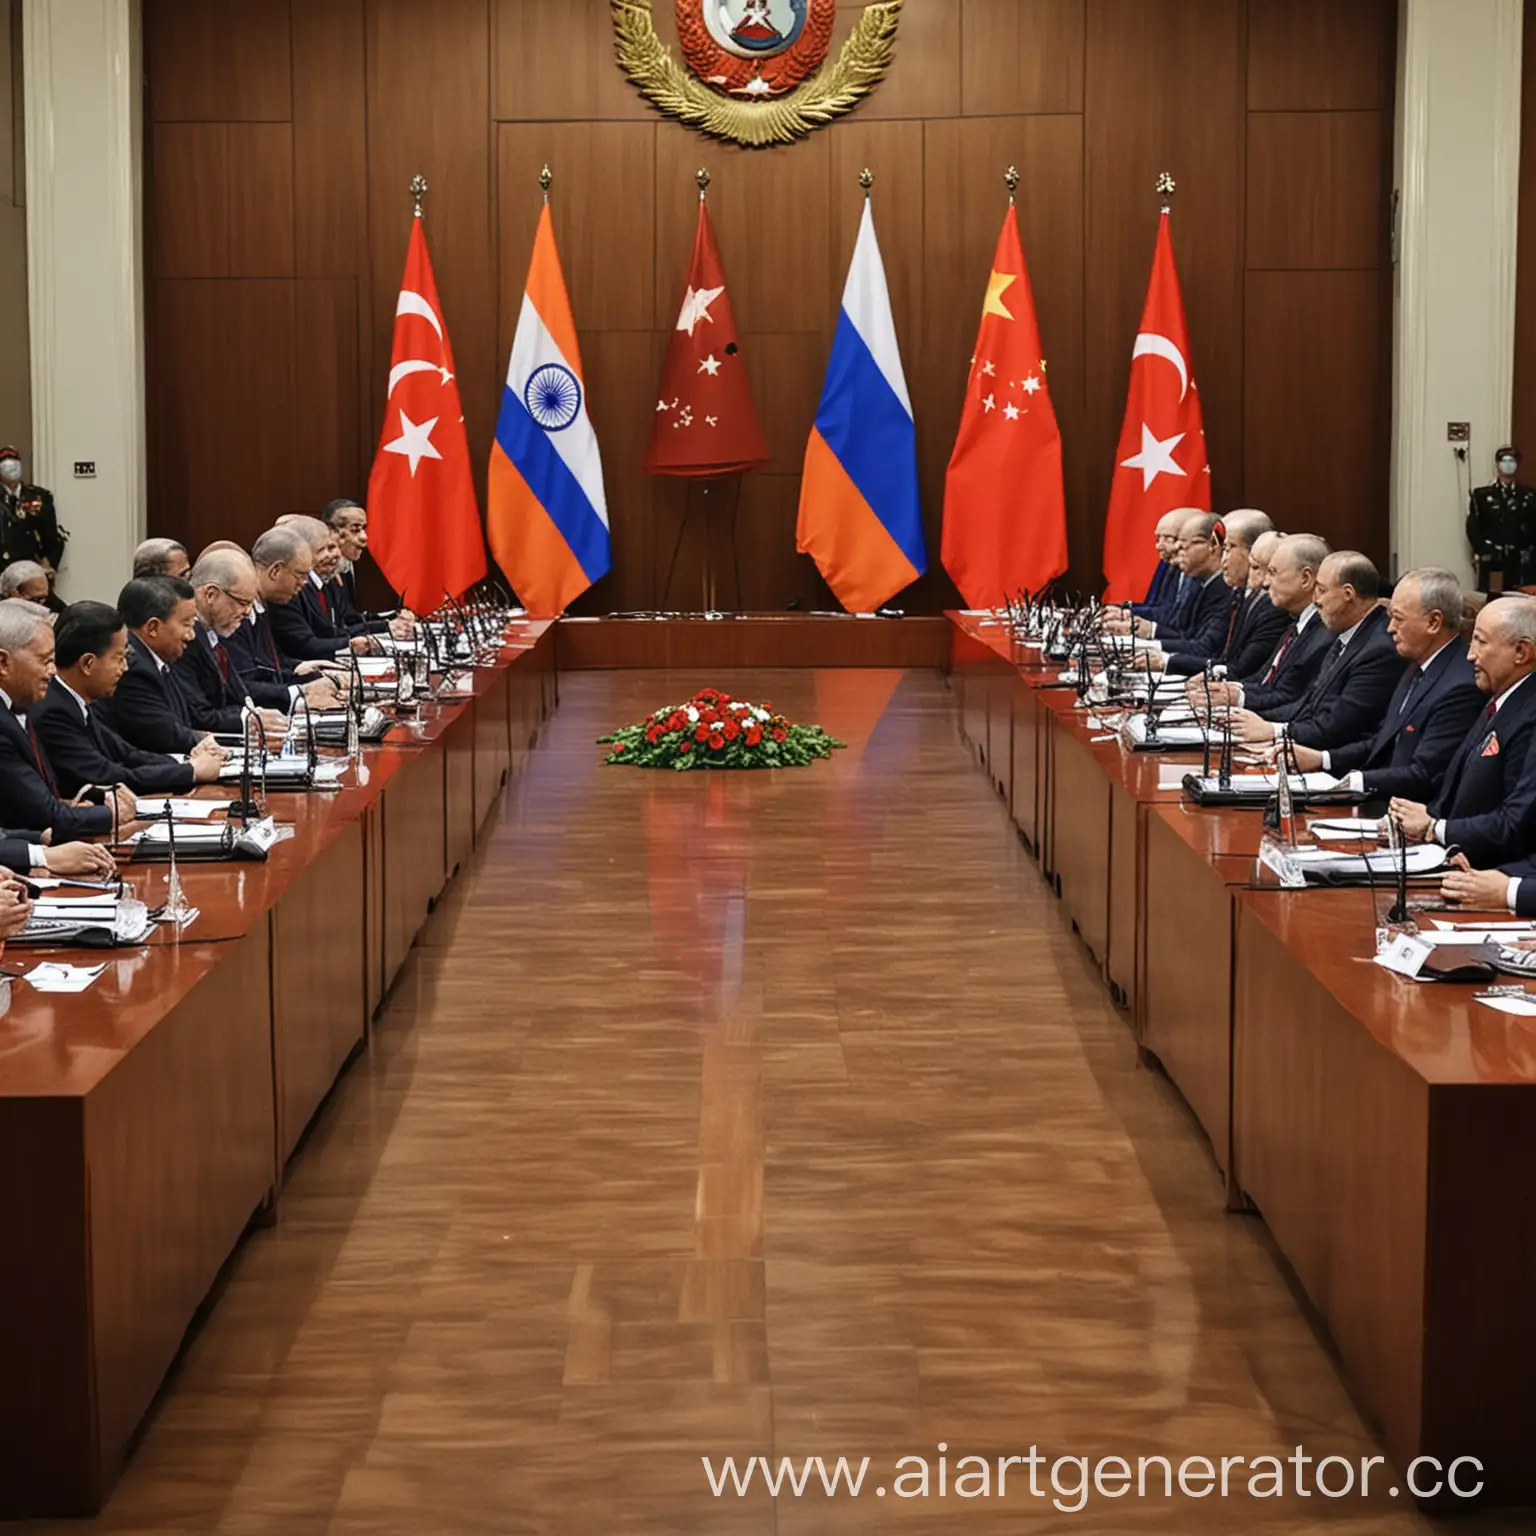 Leaders of India, China, Russia, and Turkey are sitting together